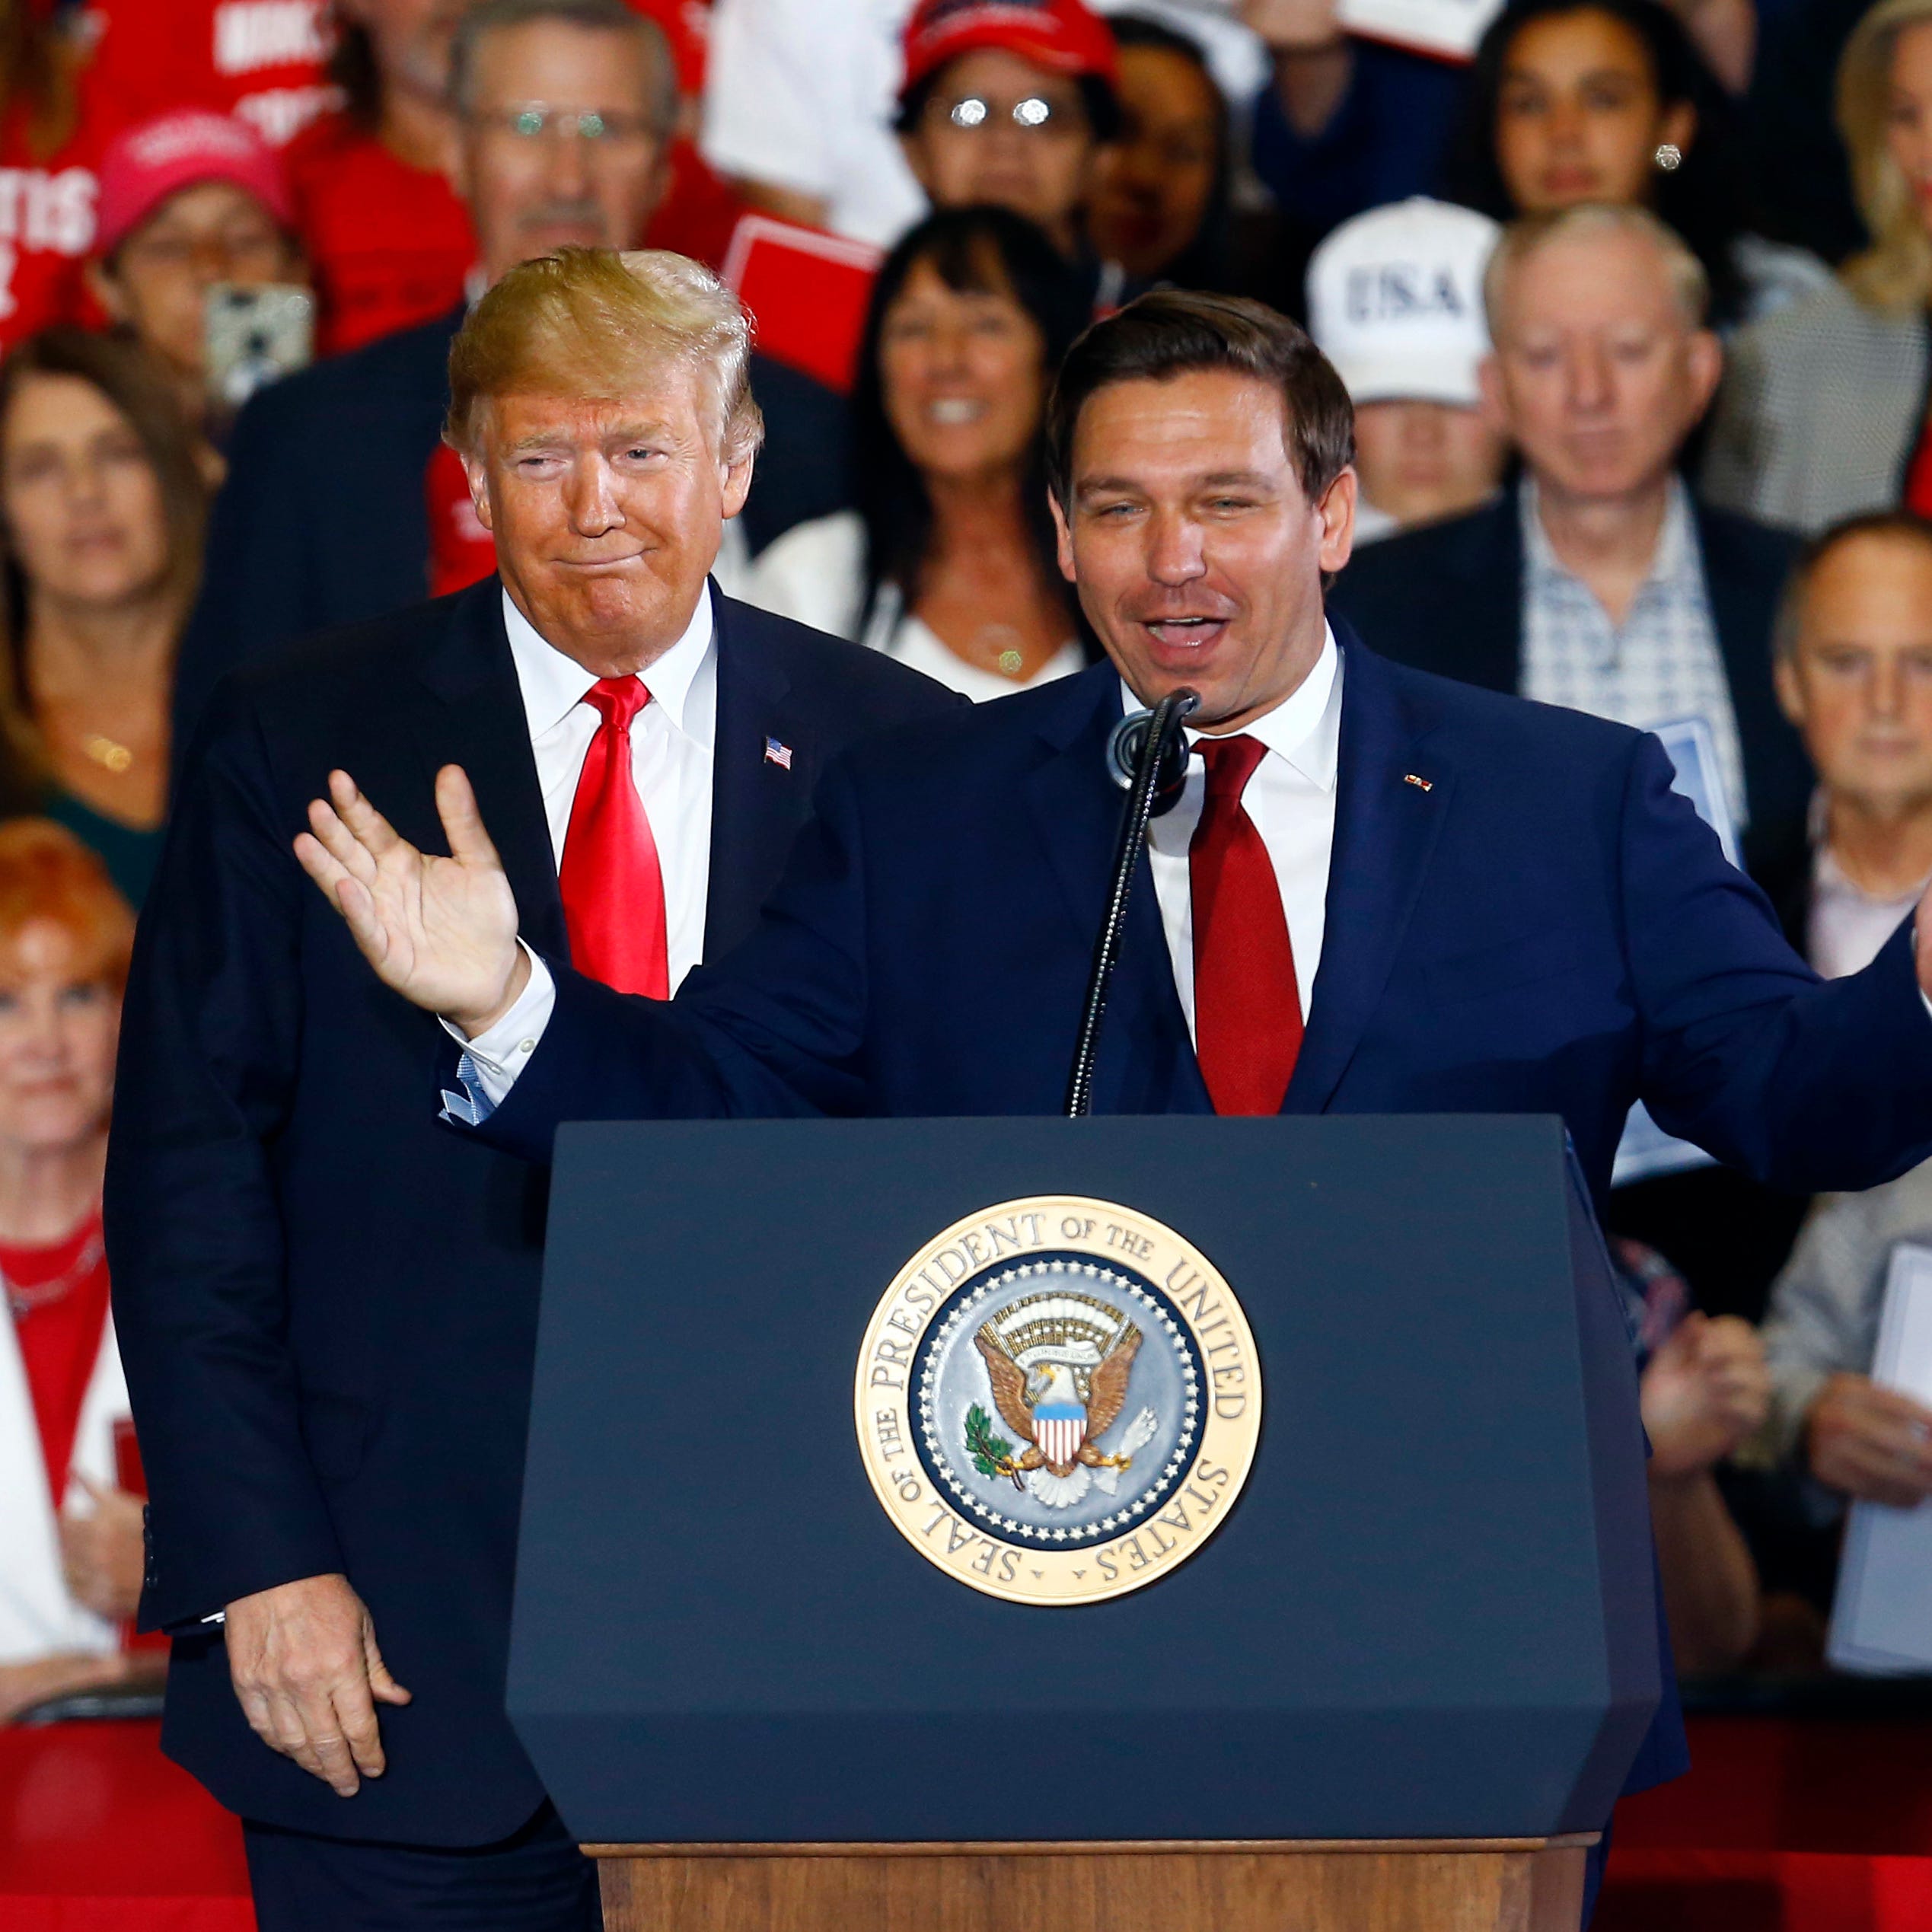 Former President Donald Trump stands behind Ron DeSantis, then a candidate for governor of Florida, at a 2018 rally in Pensacola, Fla. The former allies could find themselves competing against each other for the presidency in 2024.